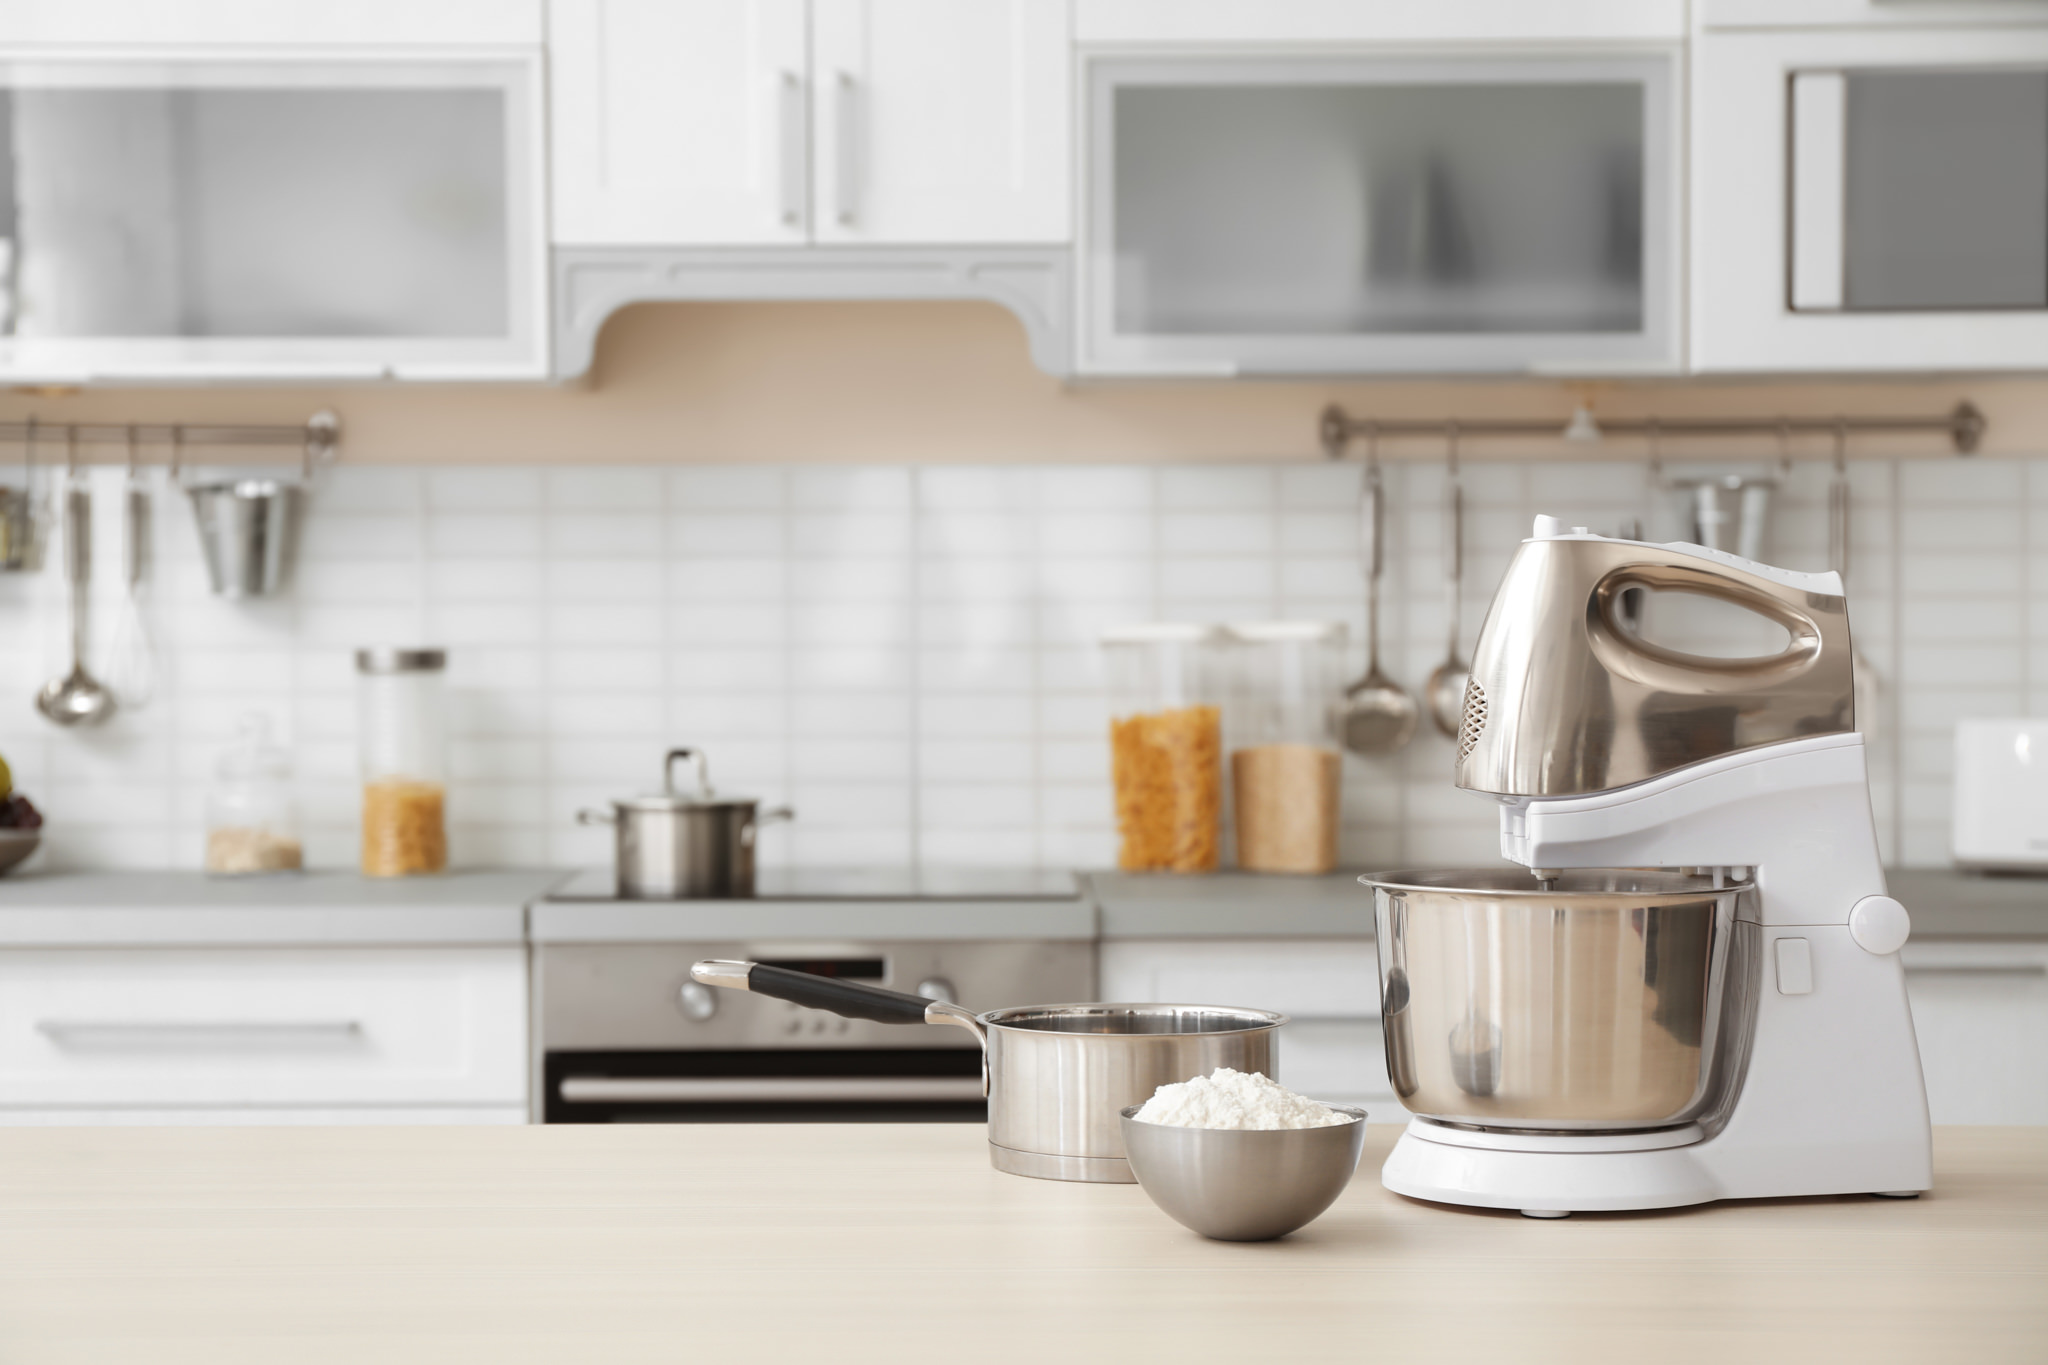 Housewares and Appliance Industry